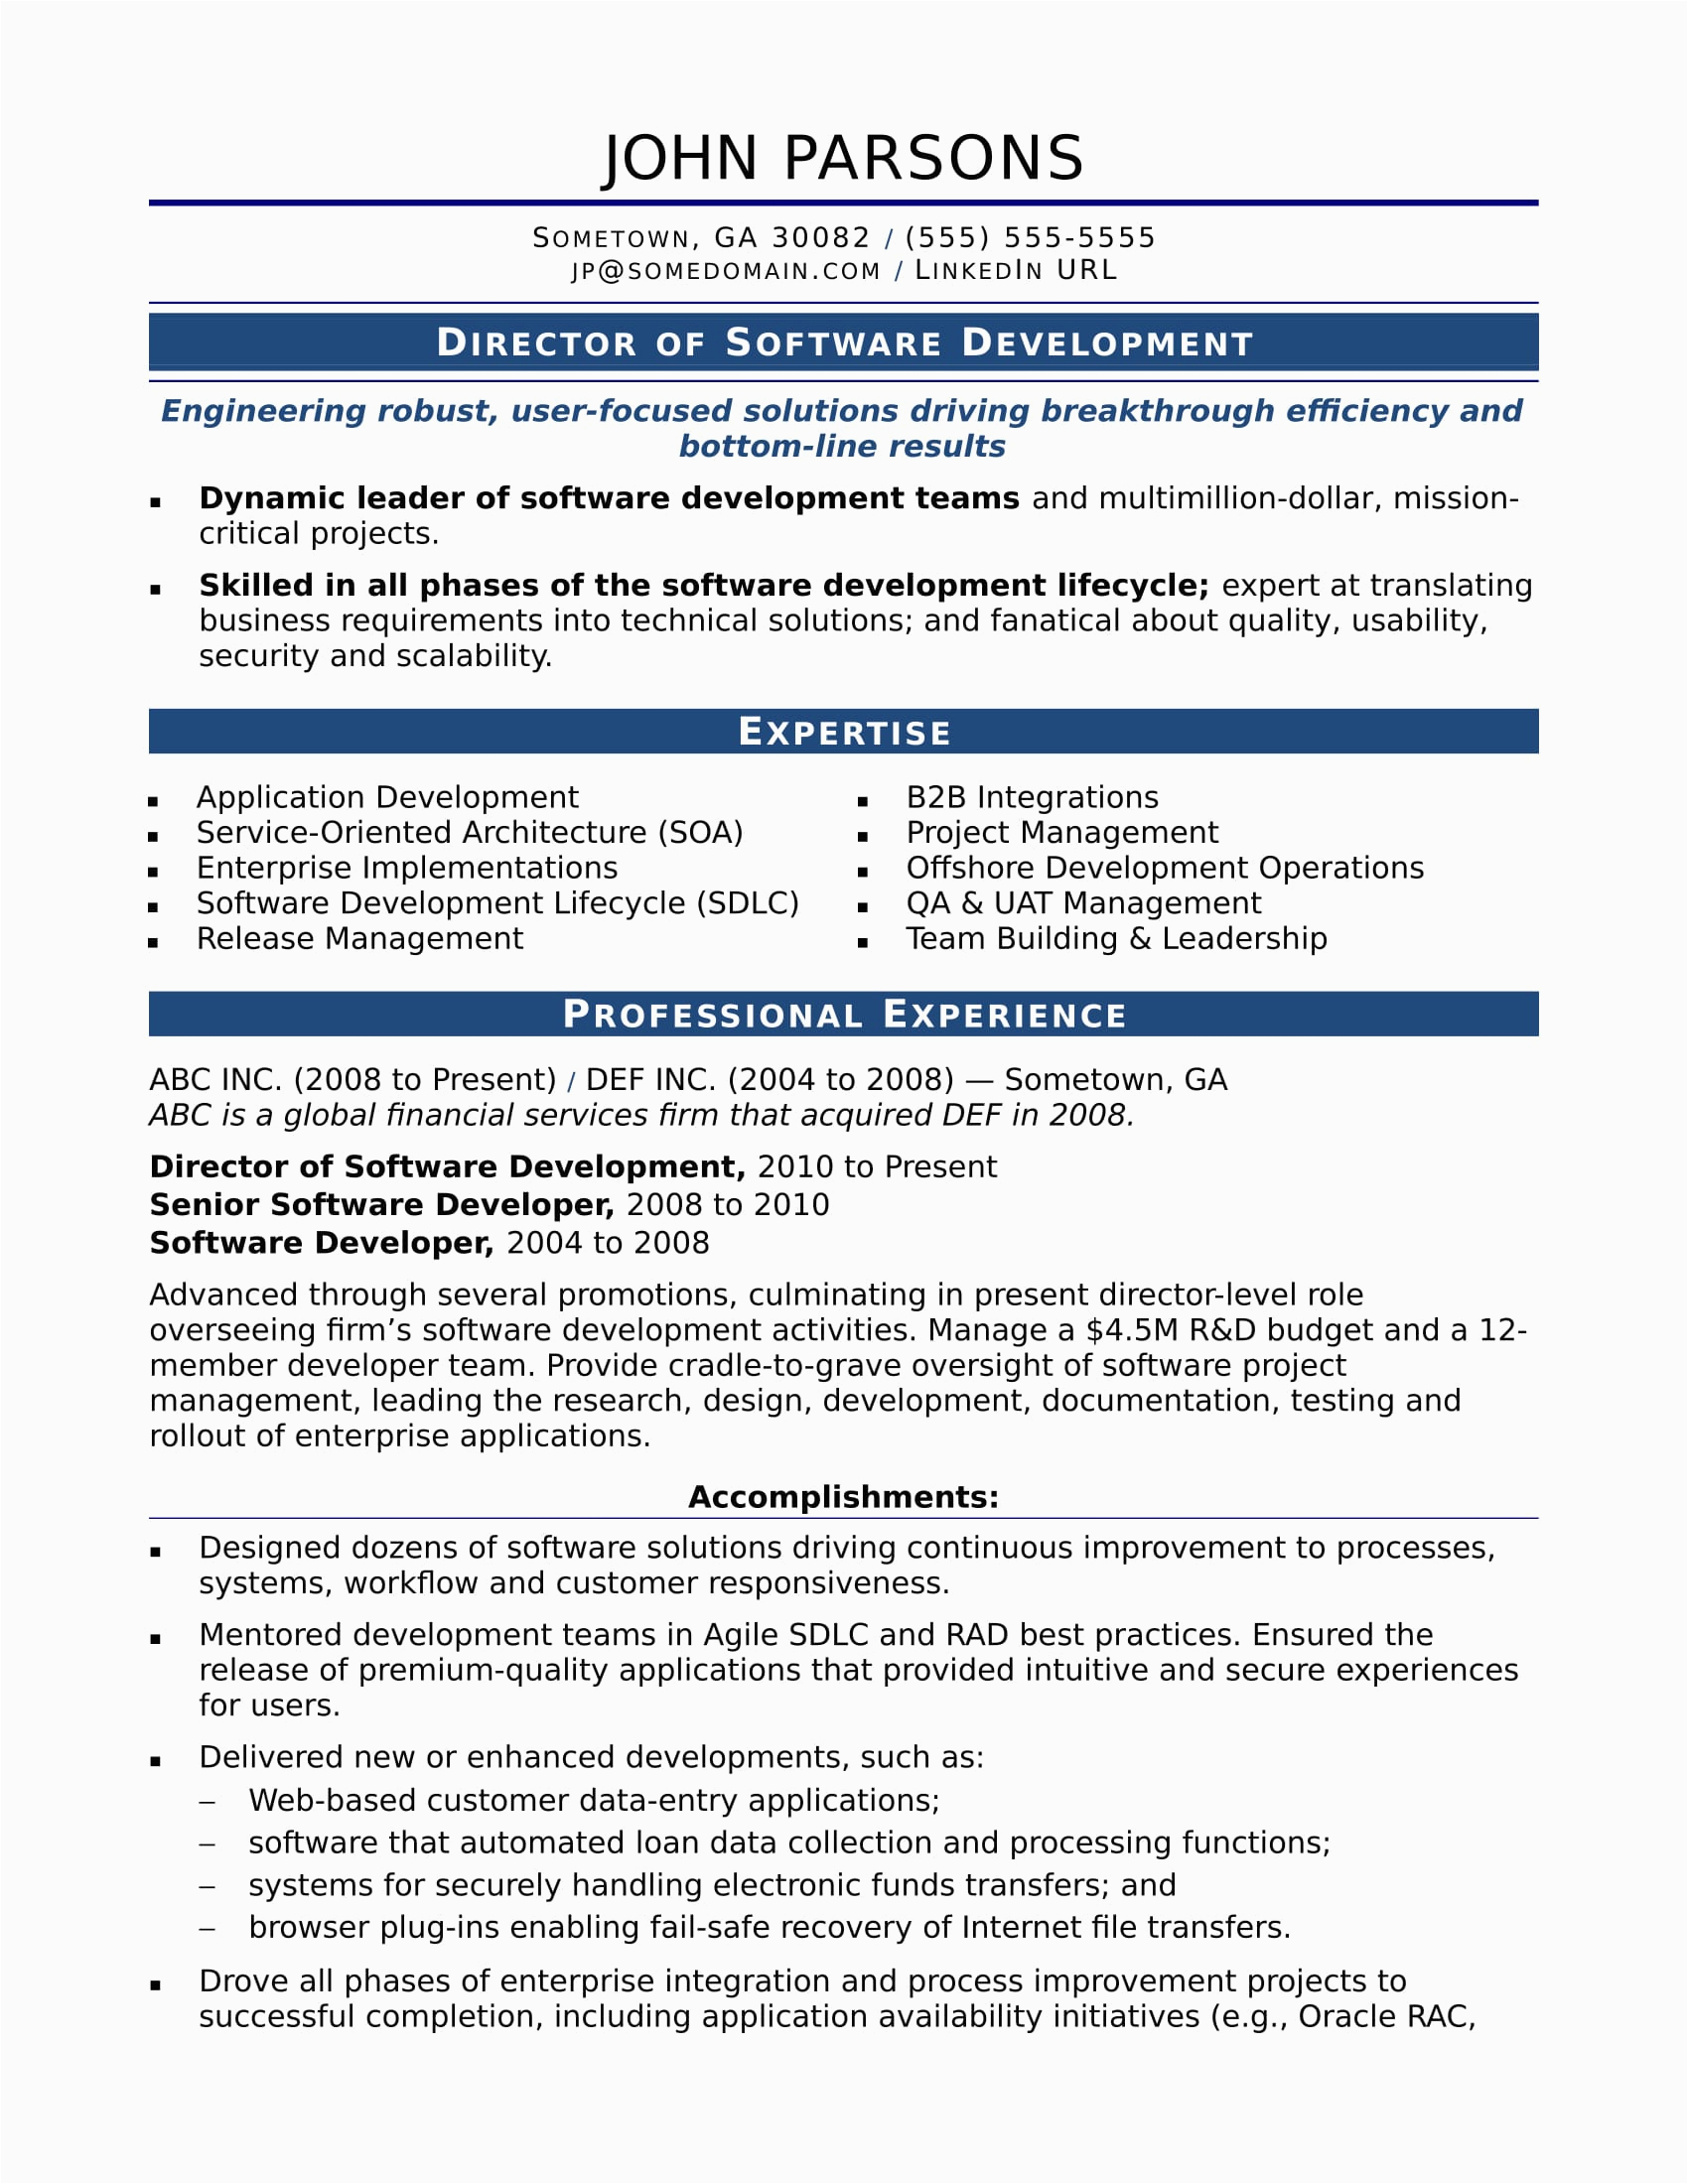 Sample Resume Template for Experienced Candidate Sample Resume for An Experienced It Developer